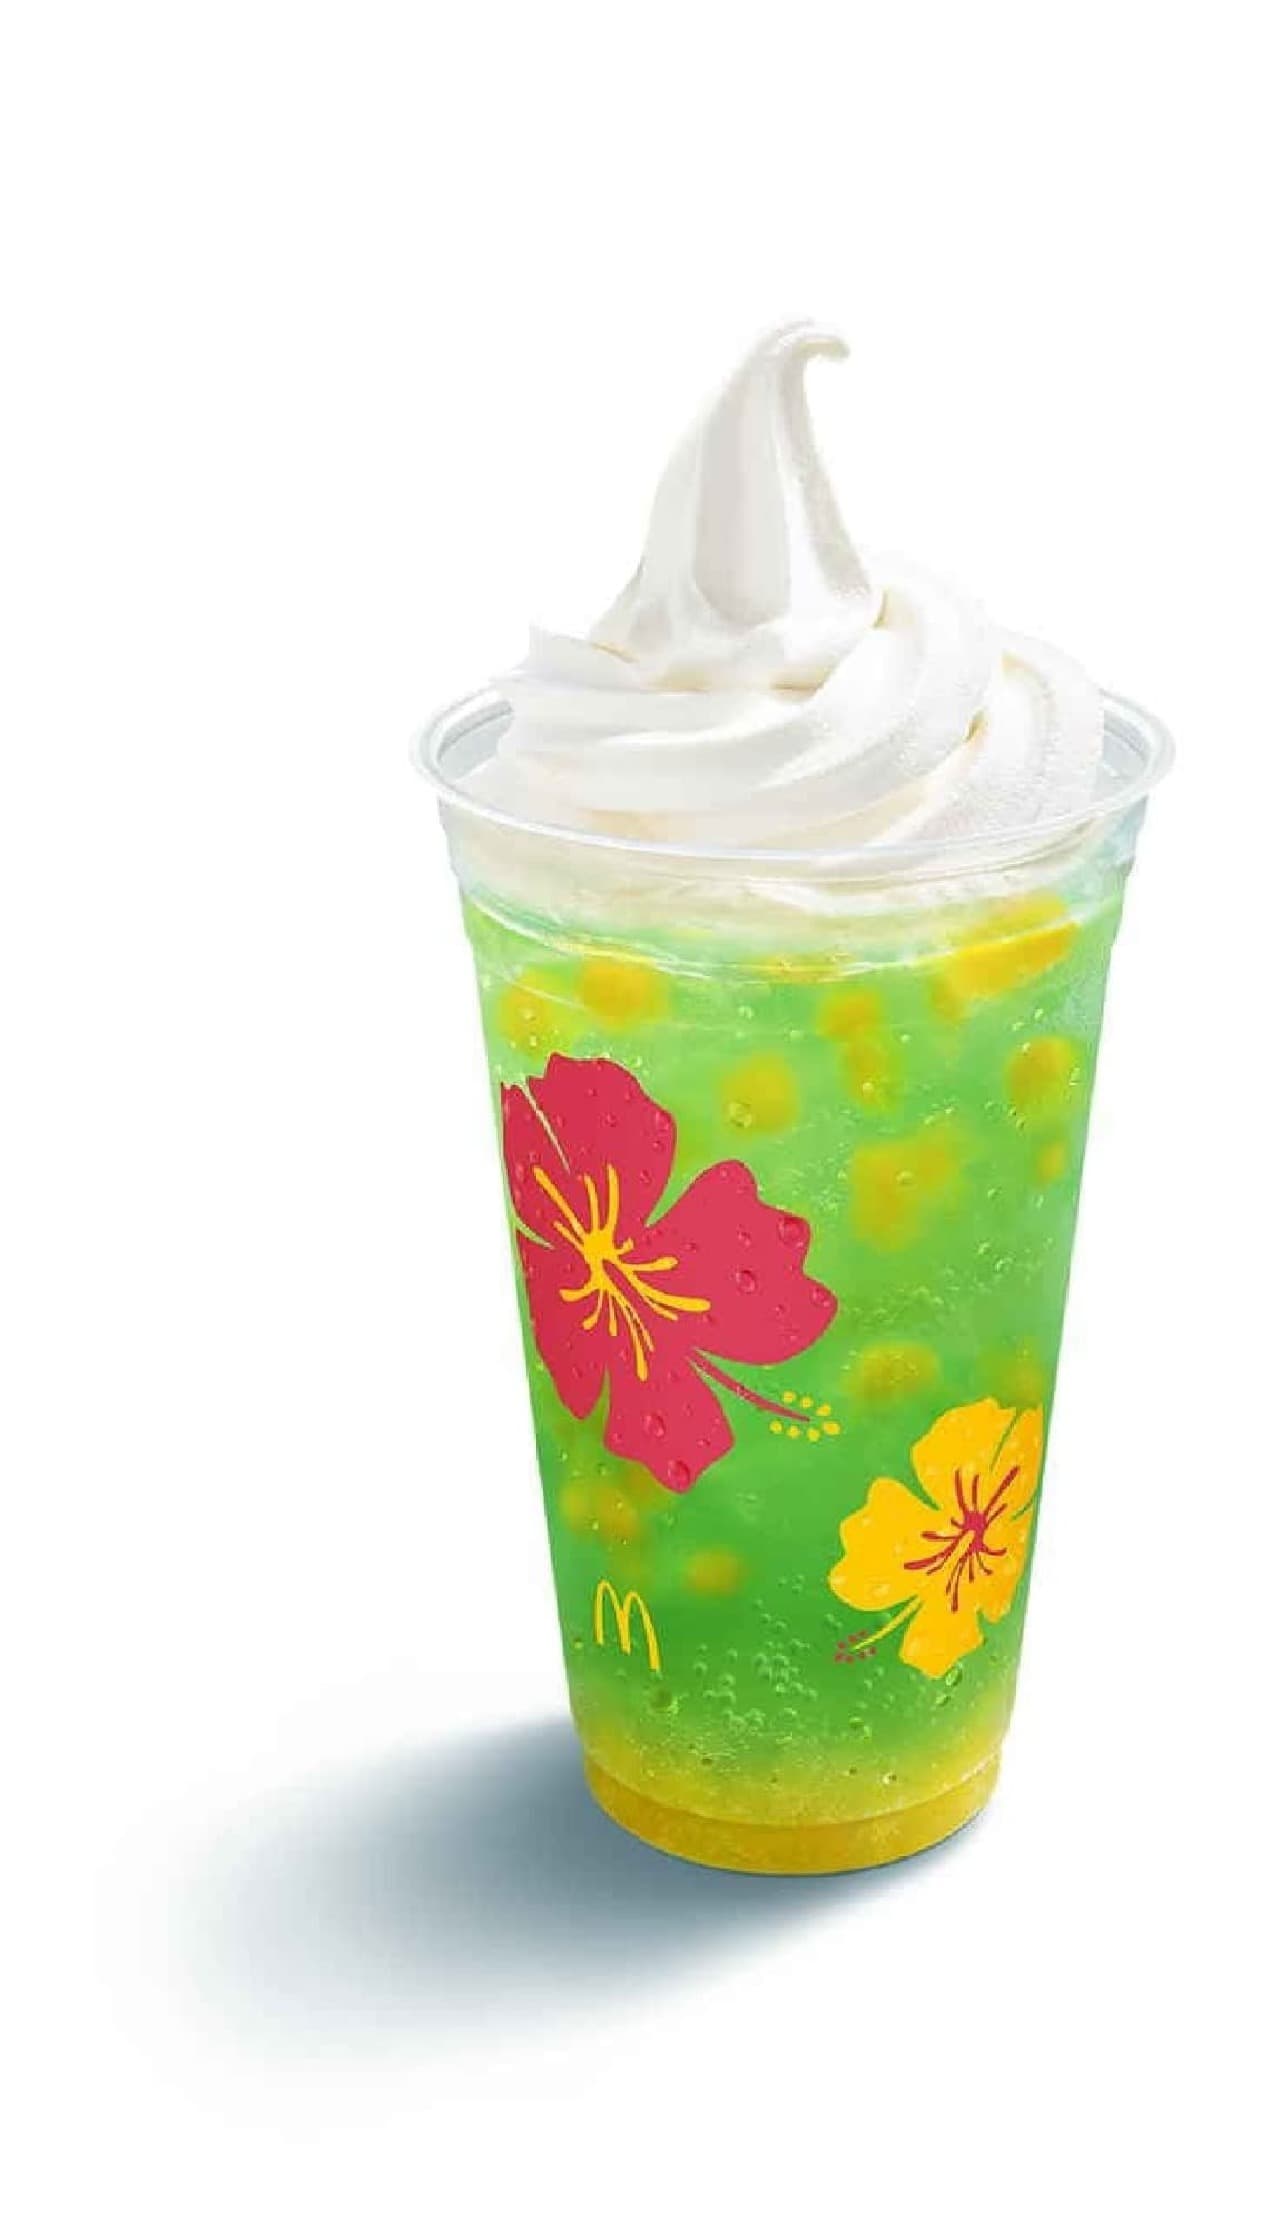 McDonald's "Hawaii! All Together" McFloat with Mango Pulp